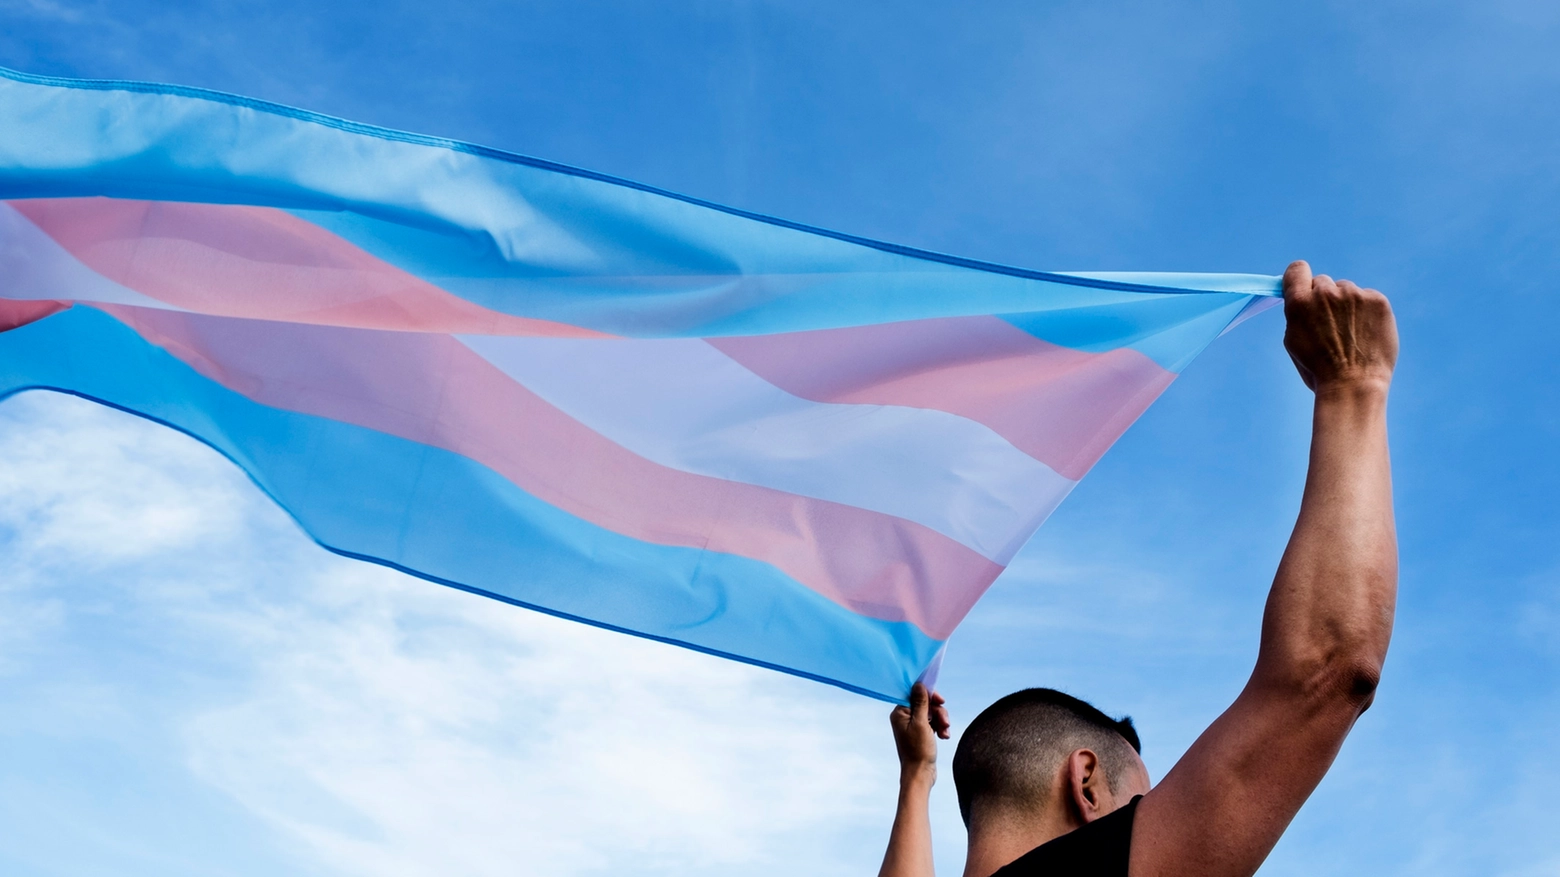 young person with a transgender pride flag